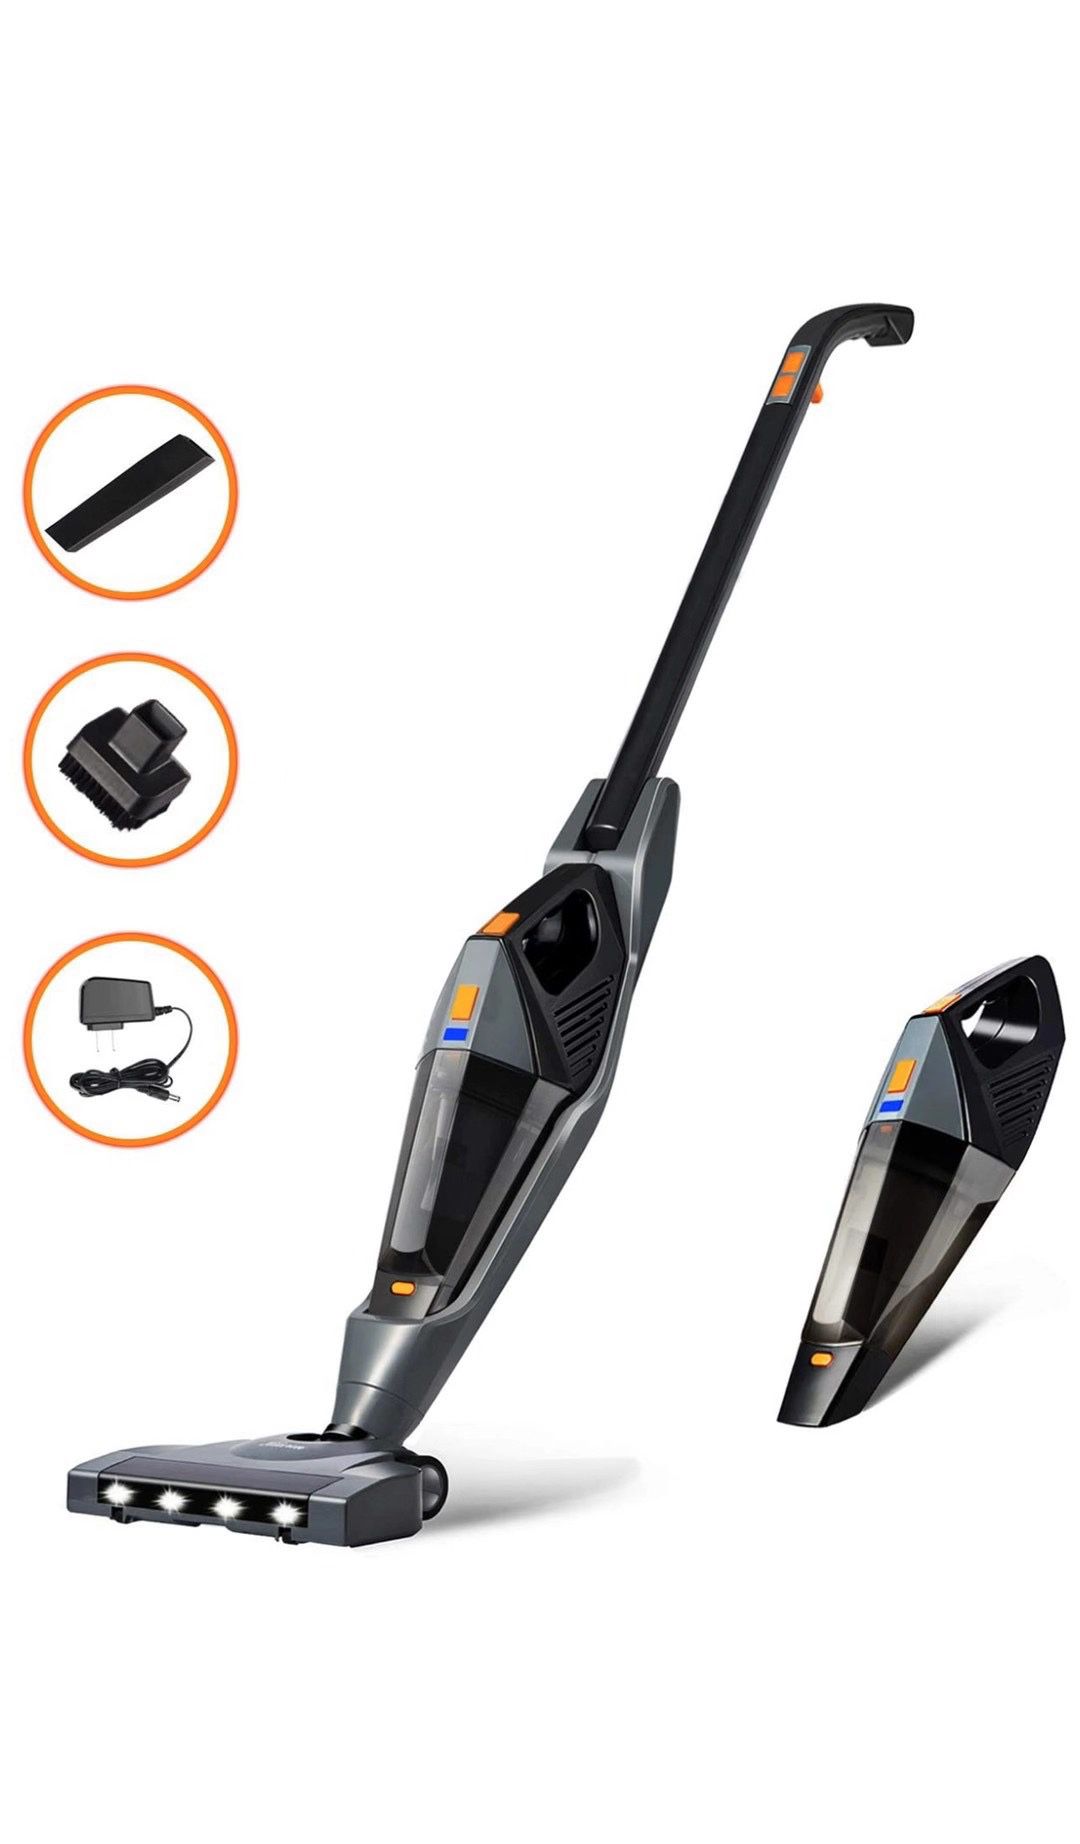 Cordless Vacuum, 12000 PA Stick Vacuum Cleaner, 2 in 1 Lightweight Rechargeable Bagless Stick and Handheld Vacuum for Carpet Hardwood Floor Pet Hair